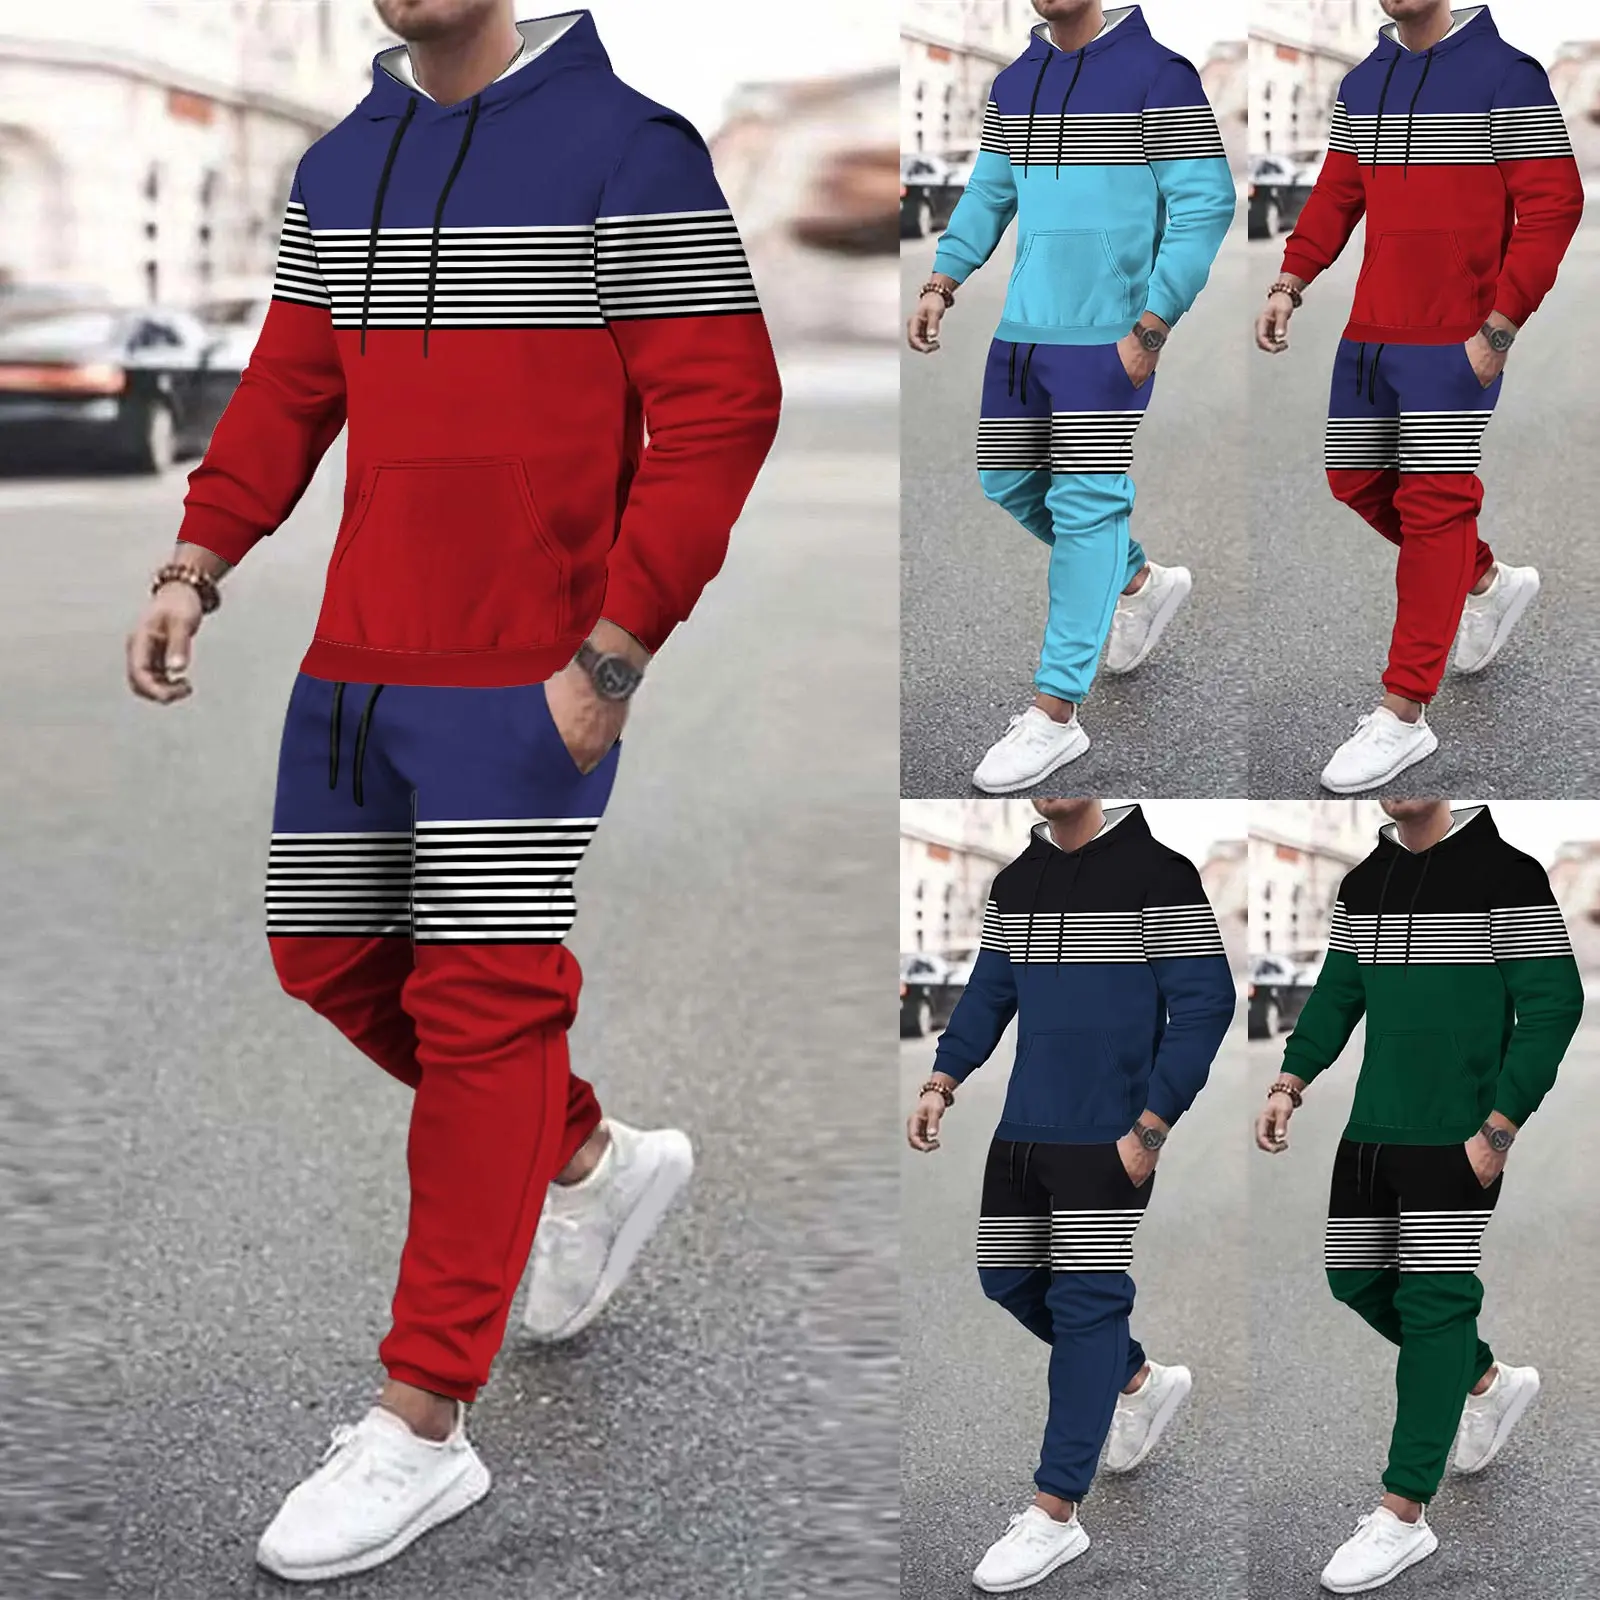 Striped print Hot Sale Mens New Tracksuit Hoodies and Trousers High Quality Male Dialy Casual Sports Jogging Set Autumn Outfits men s fashion sweater hooded jogging suit hooded striped sports sweater trousers striped casual outdoor sportswear